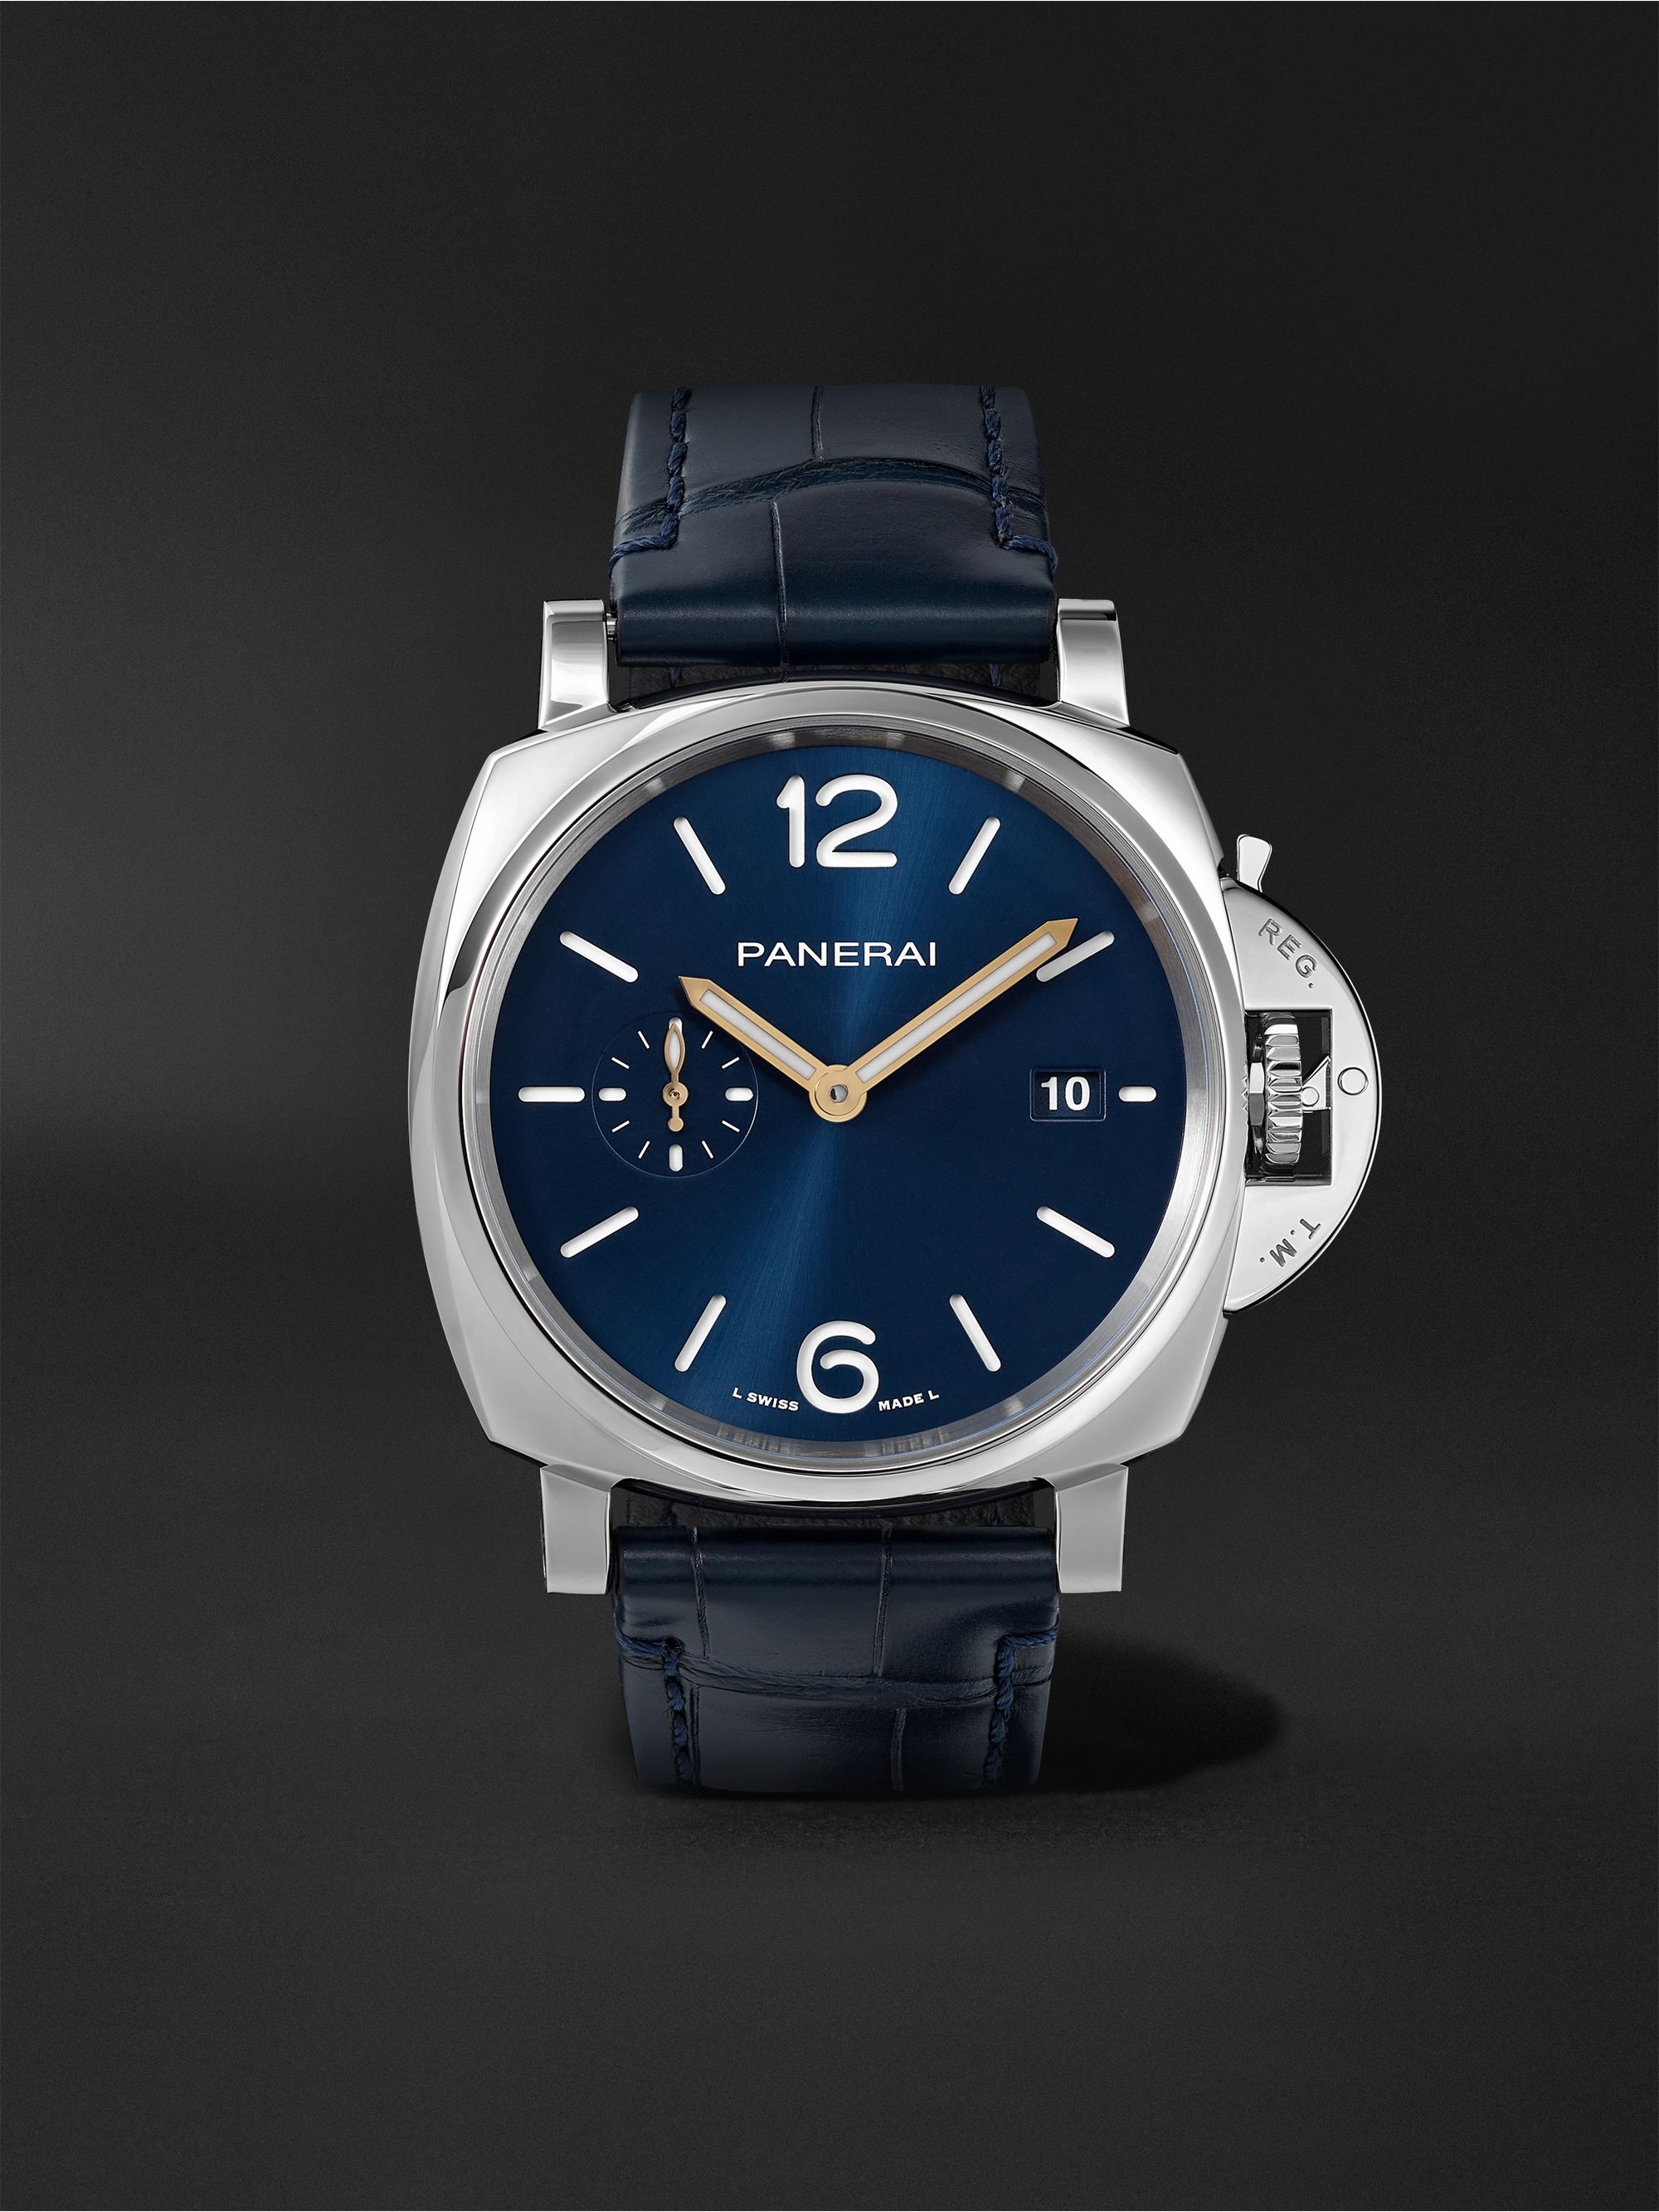 PANERAI Luminor Due Automatic 42mm Stainless Steel and Alligator Watch, Ref. No. PAM01274